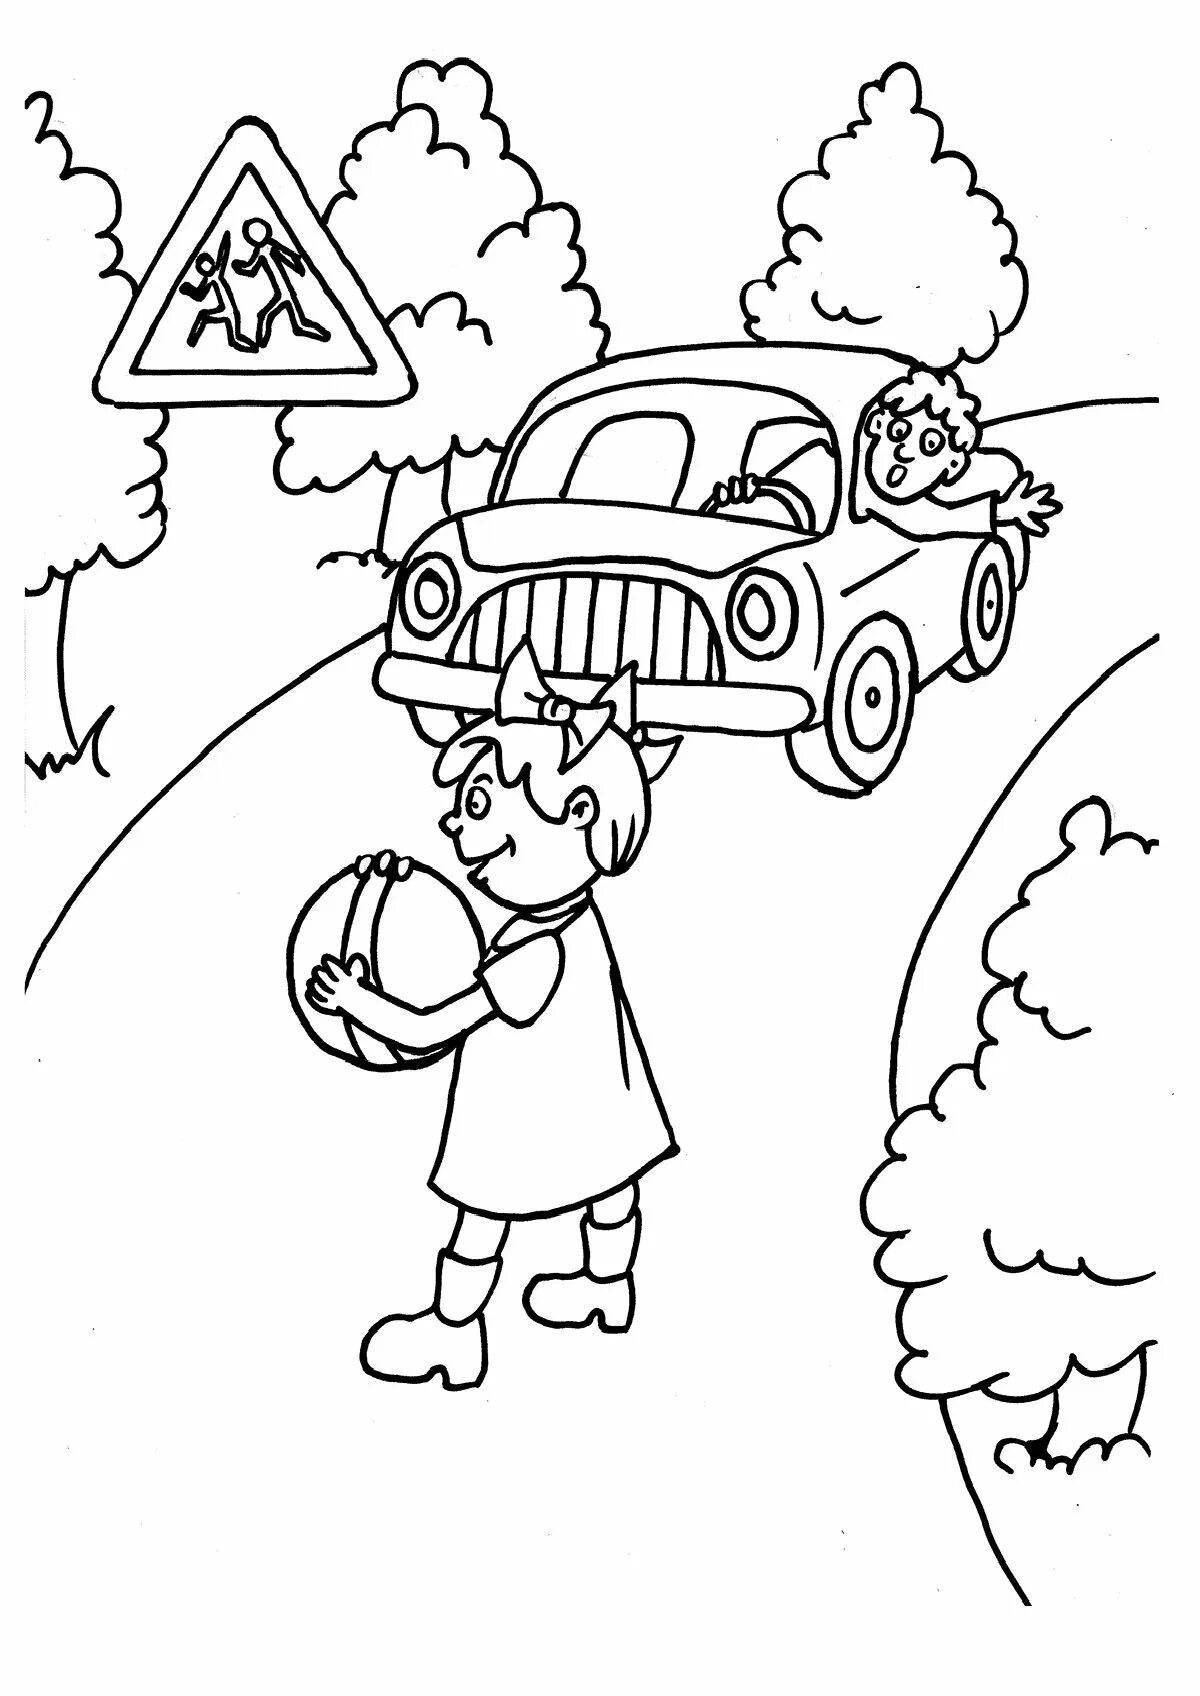 Fascinating Way Home Coloring Page